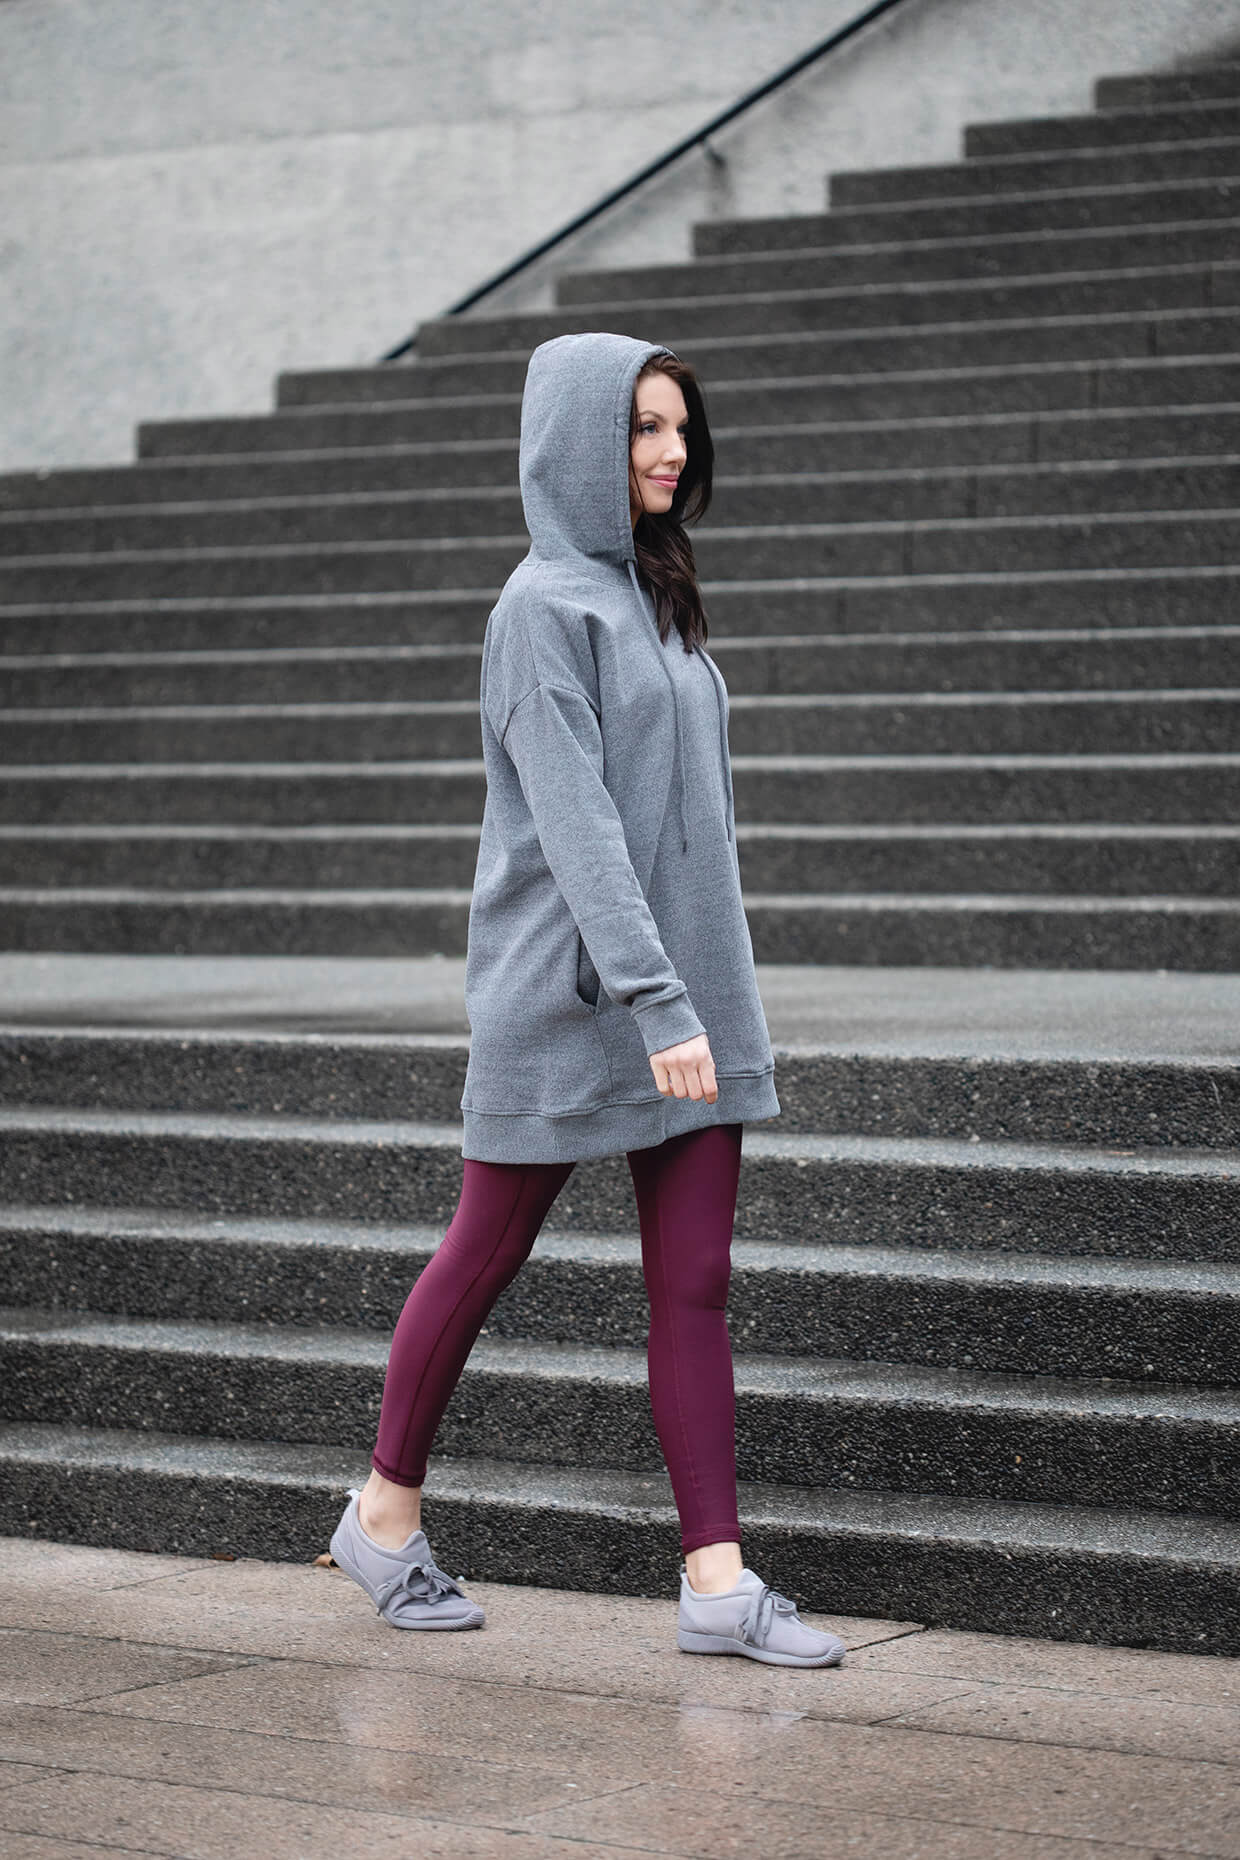 Winter Athleisure Looks Anyone Can Pull Off